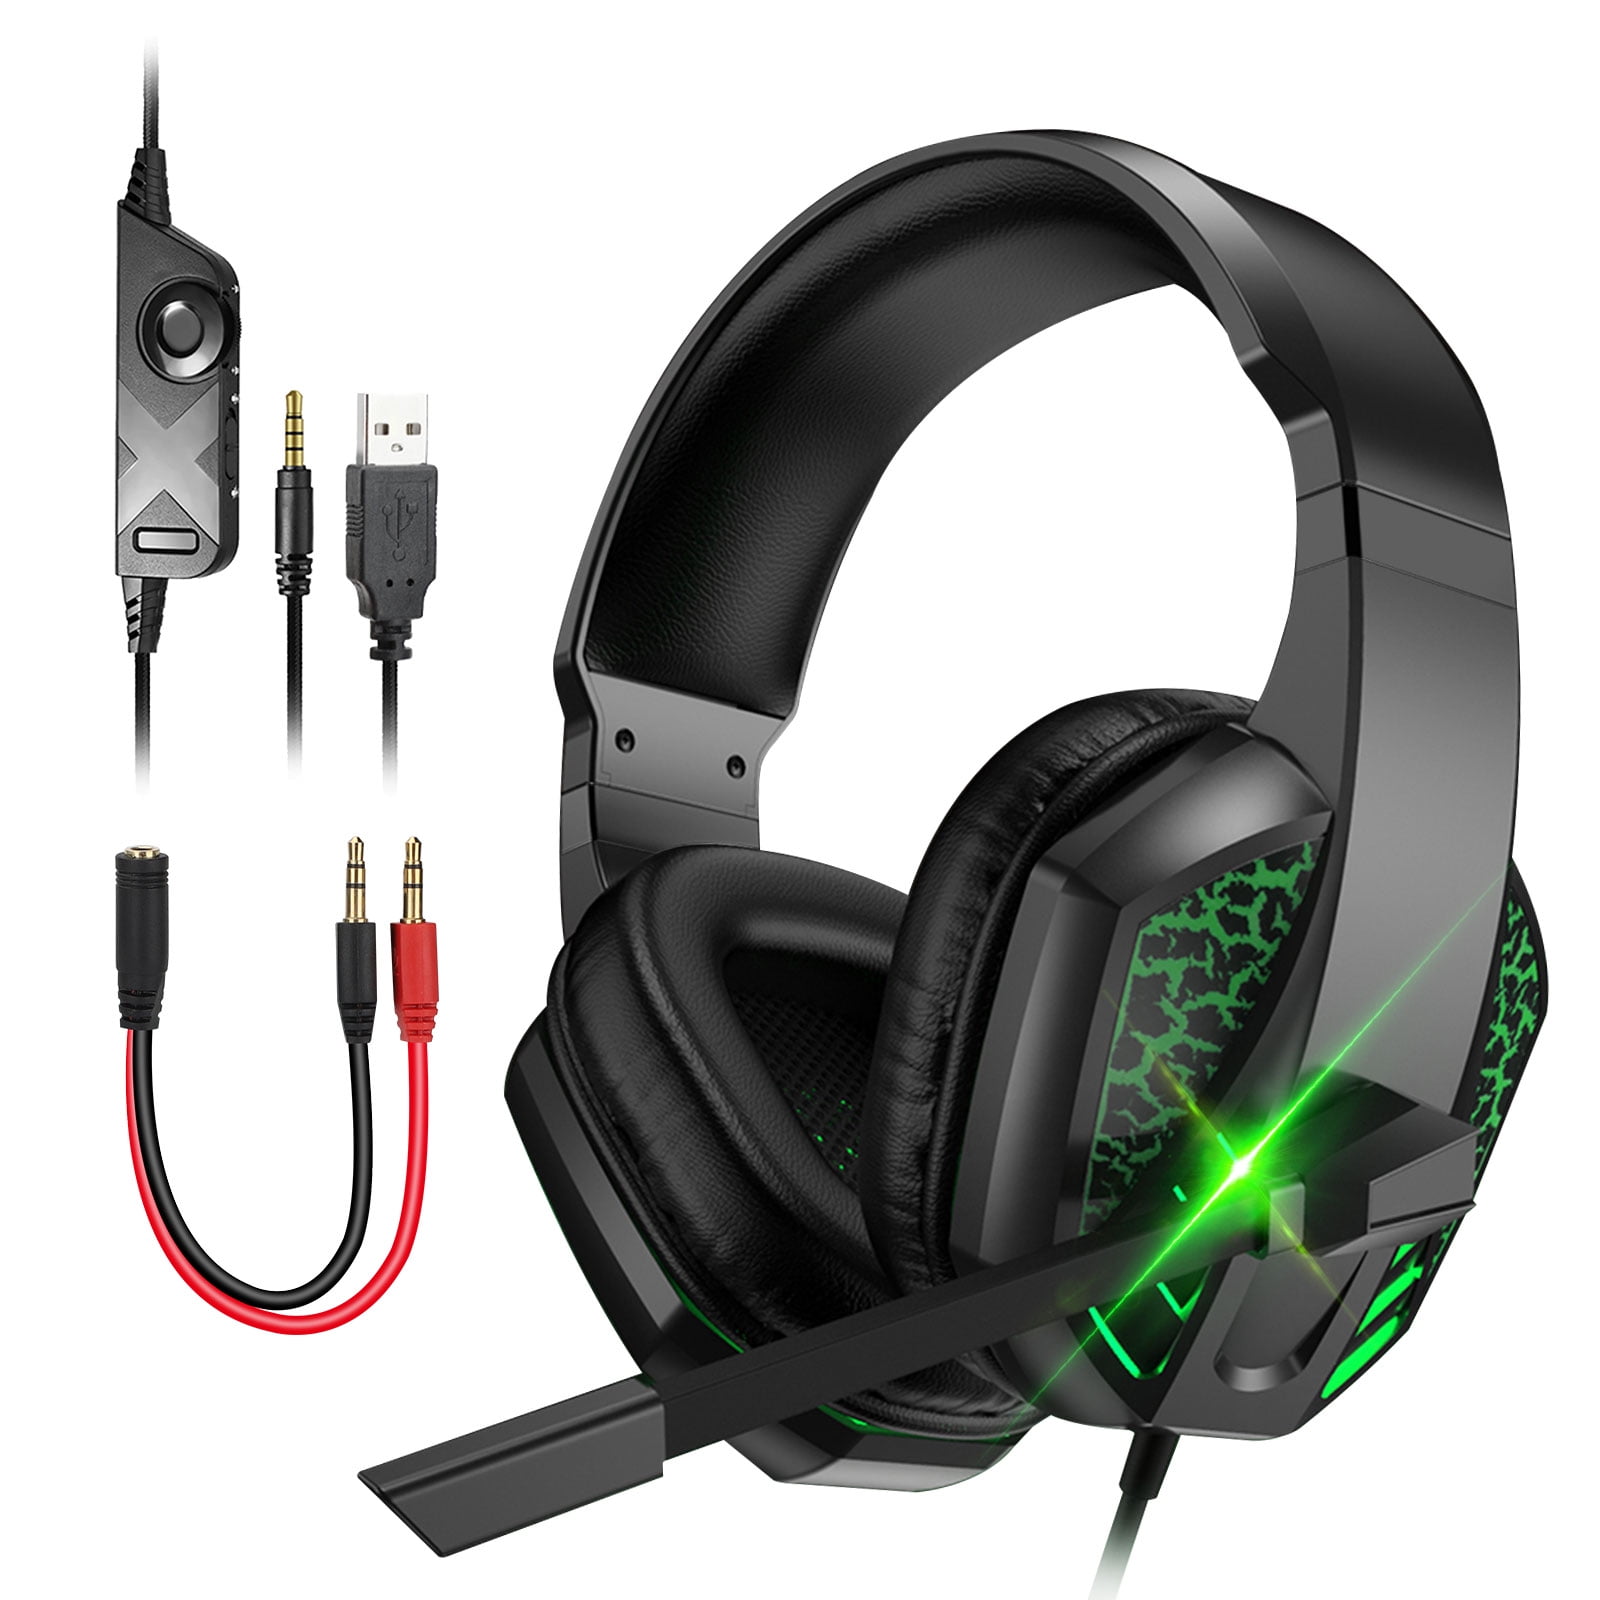 TSV Gaming Headset for PC, PS4, Xbox One, Laptop Headset, Crystal Clear Stereo Sound Computer Gamer Headset with Noise Canceling Mic and LED Light - Lightweight Comfortable Over-Ear Gaming Headphone